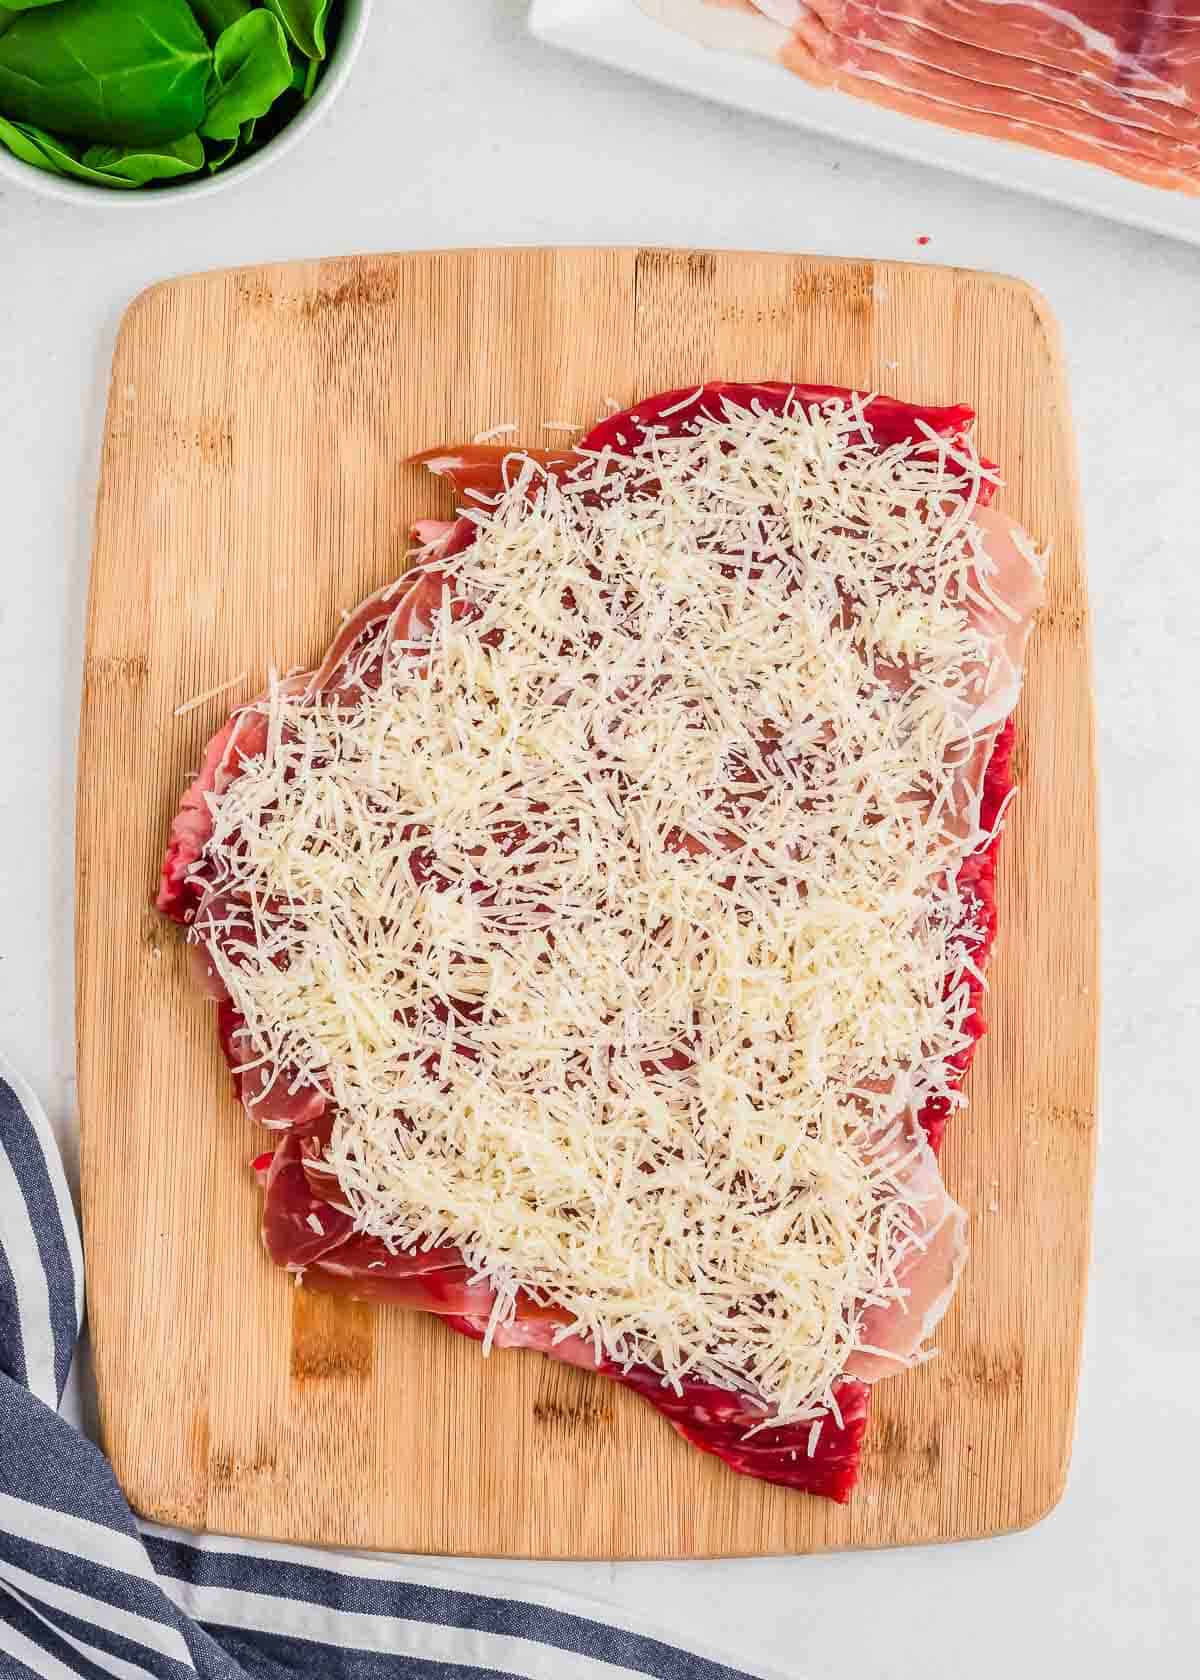 A cutting board with flank steak layered with shredded cheese, ready for cooking.